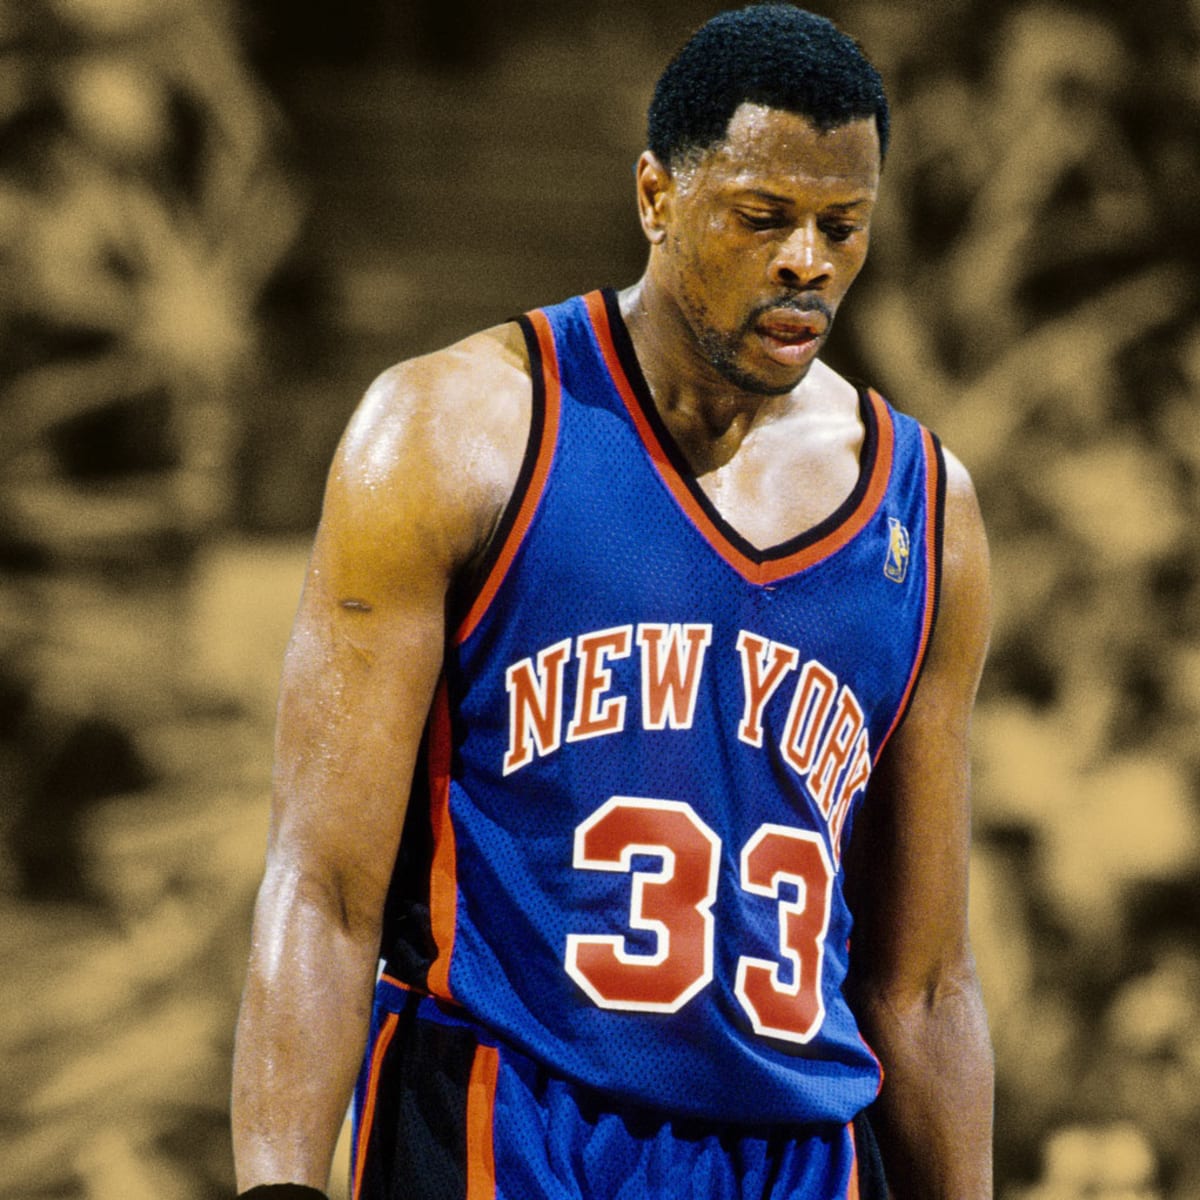 Patrick Ewing: College basketball stats, best moments, quotes